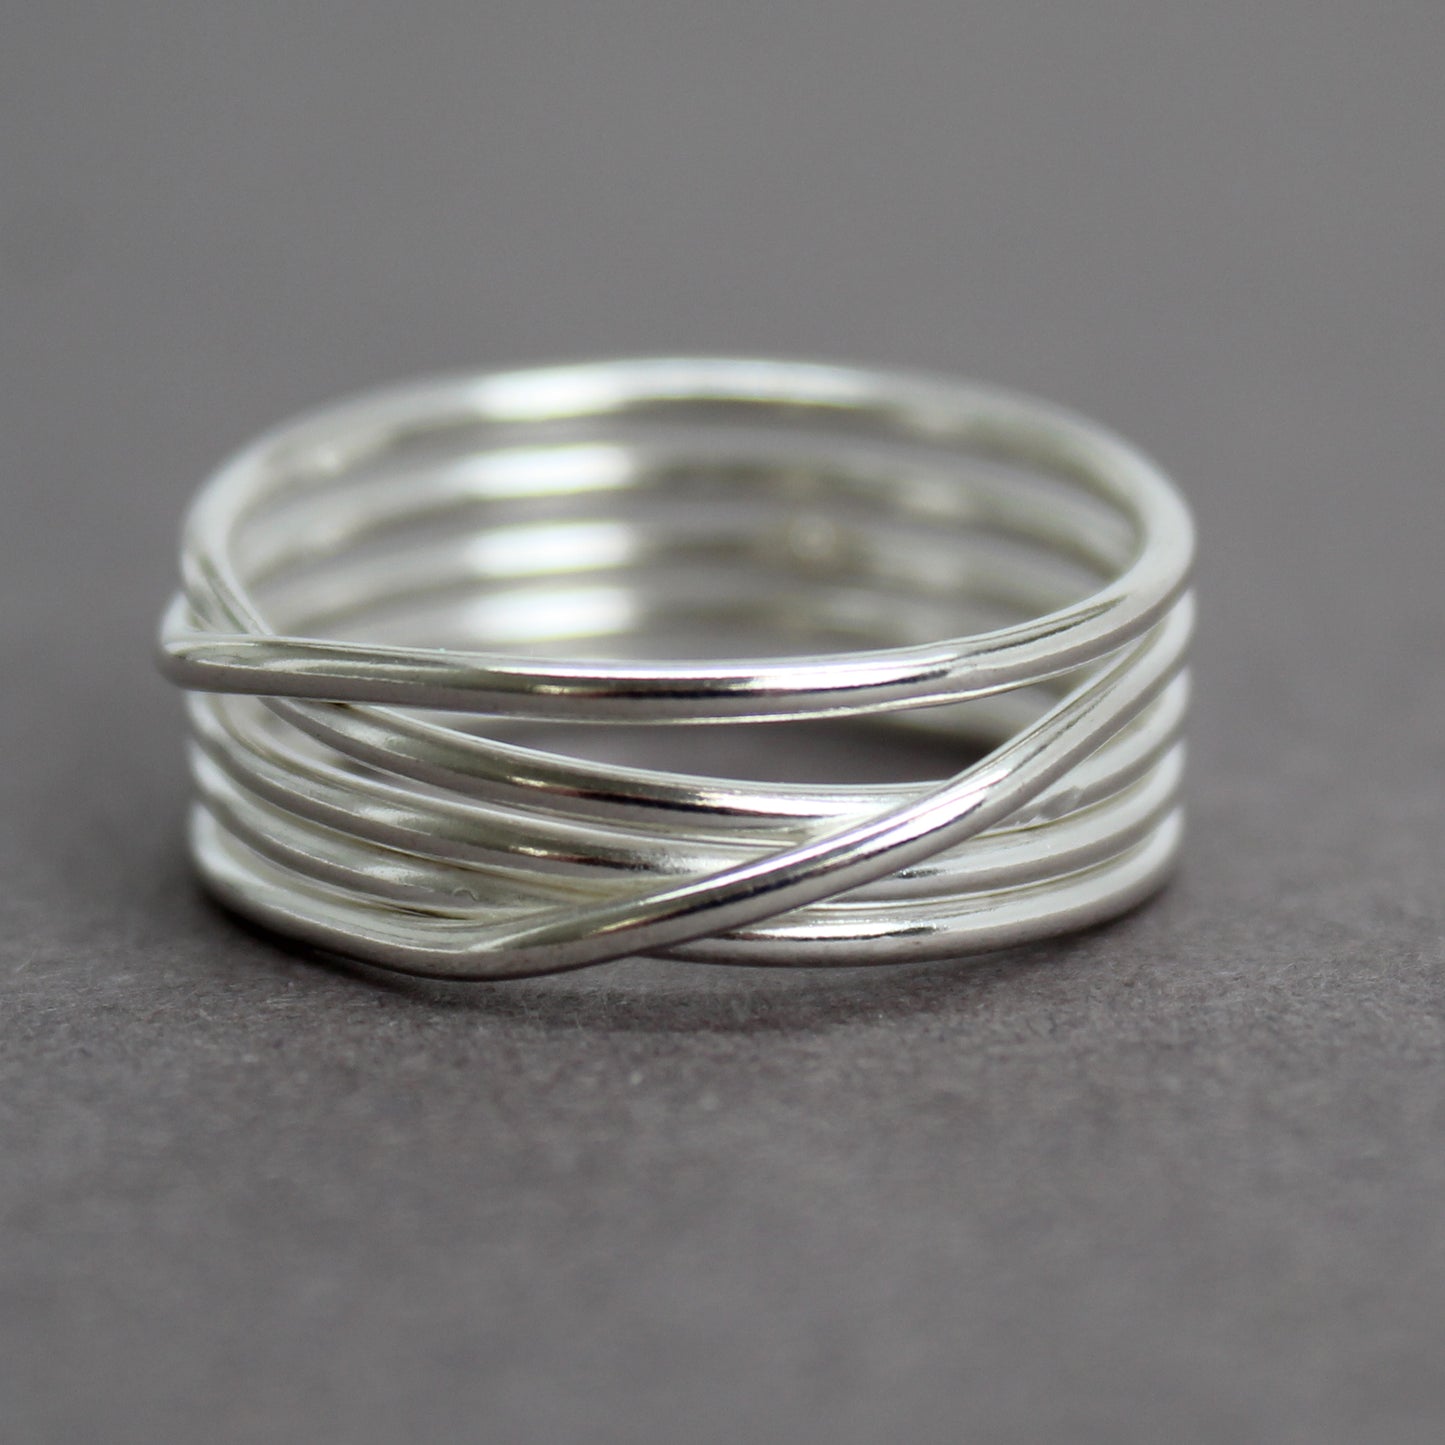 Handmade Sterling Silver Wire Ring, Statement Wrapped Ring